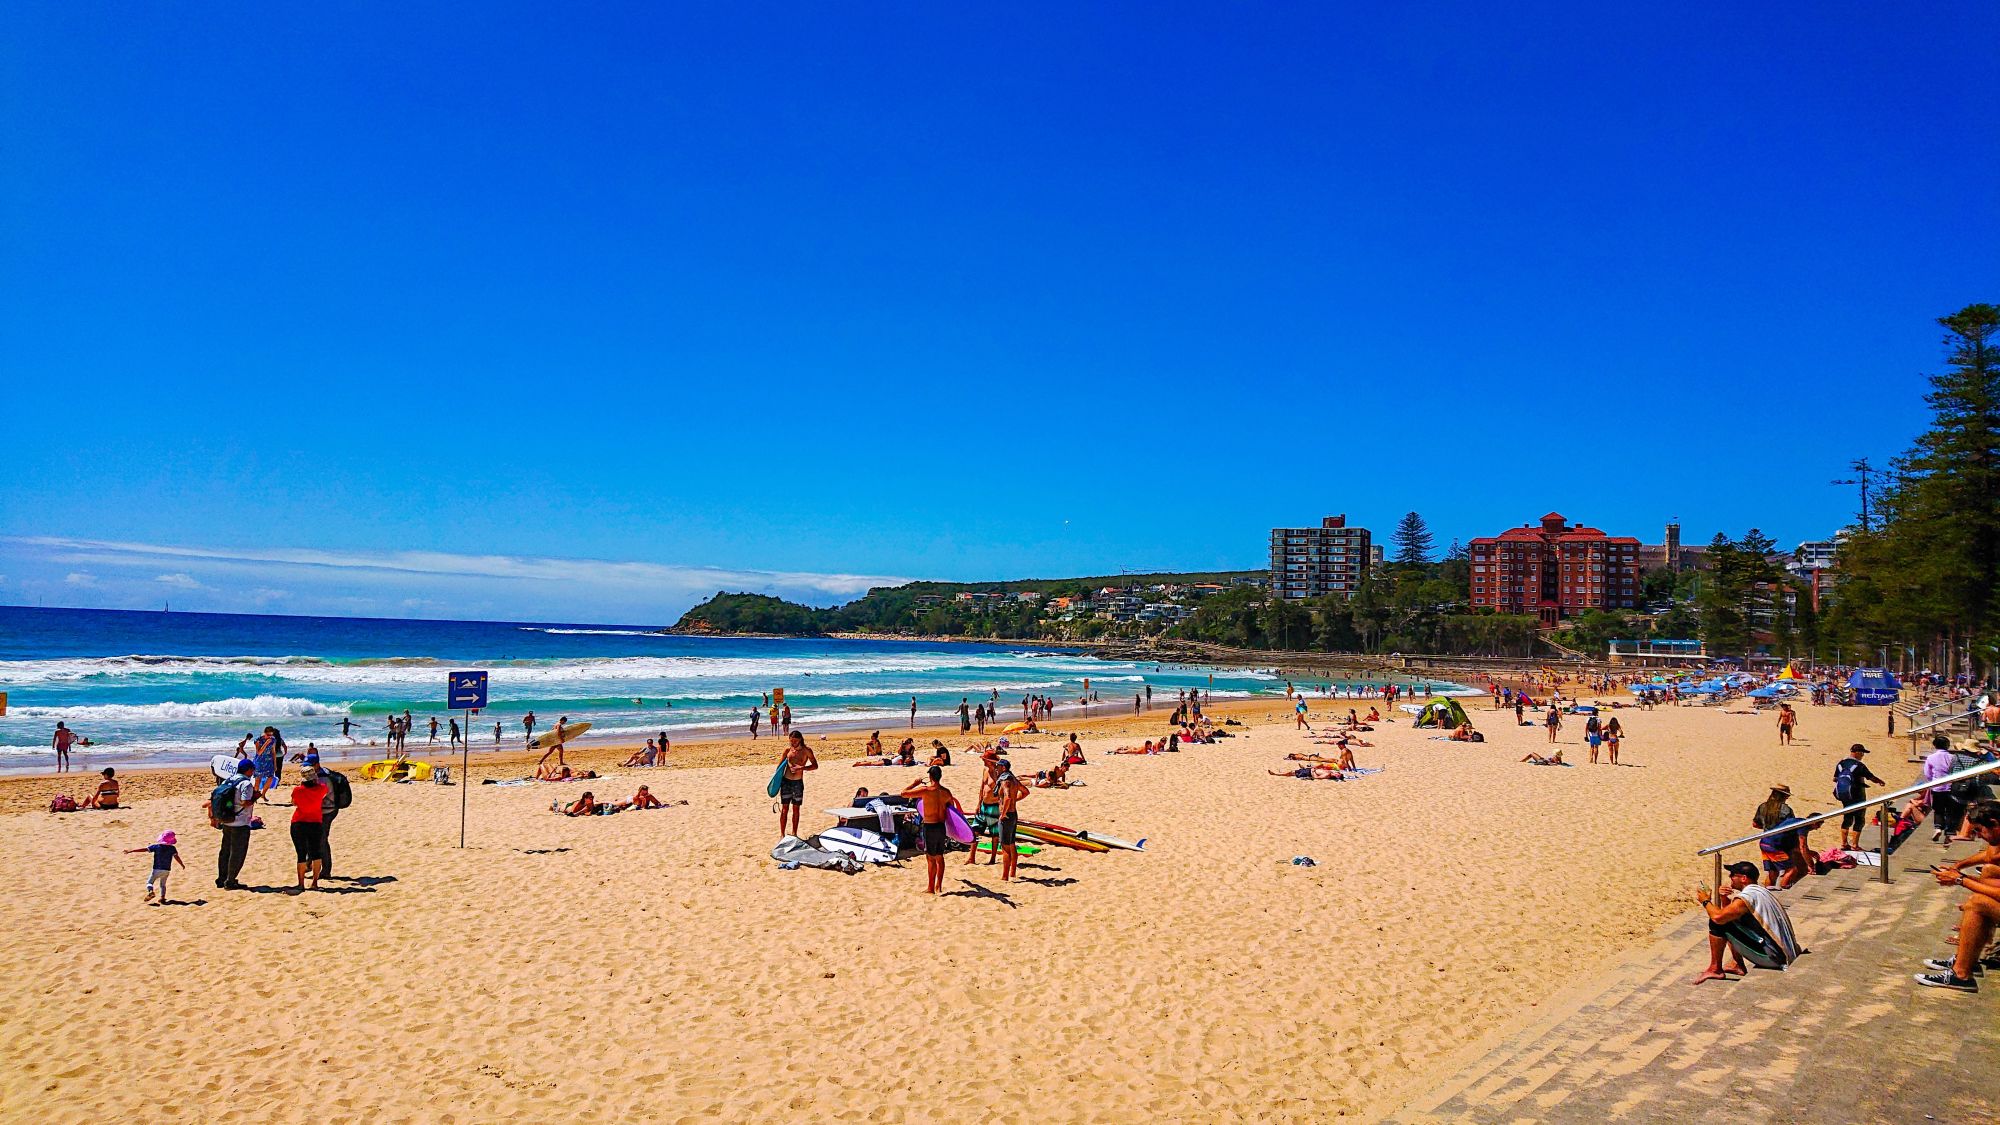 Sydney’s Northern Beaches boasts an Airbnb revenue of $4000+ per month